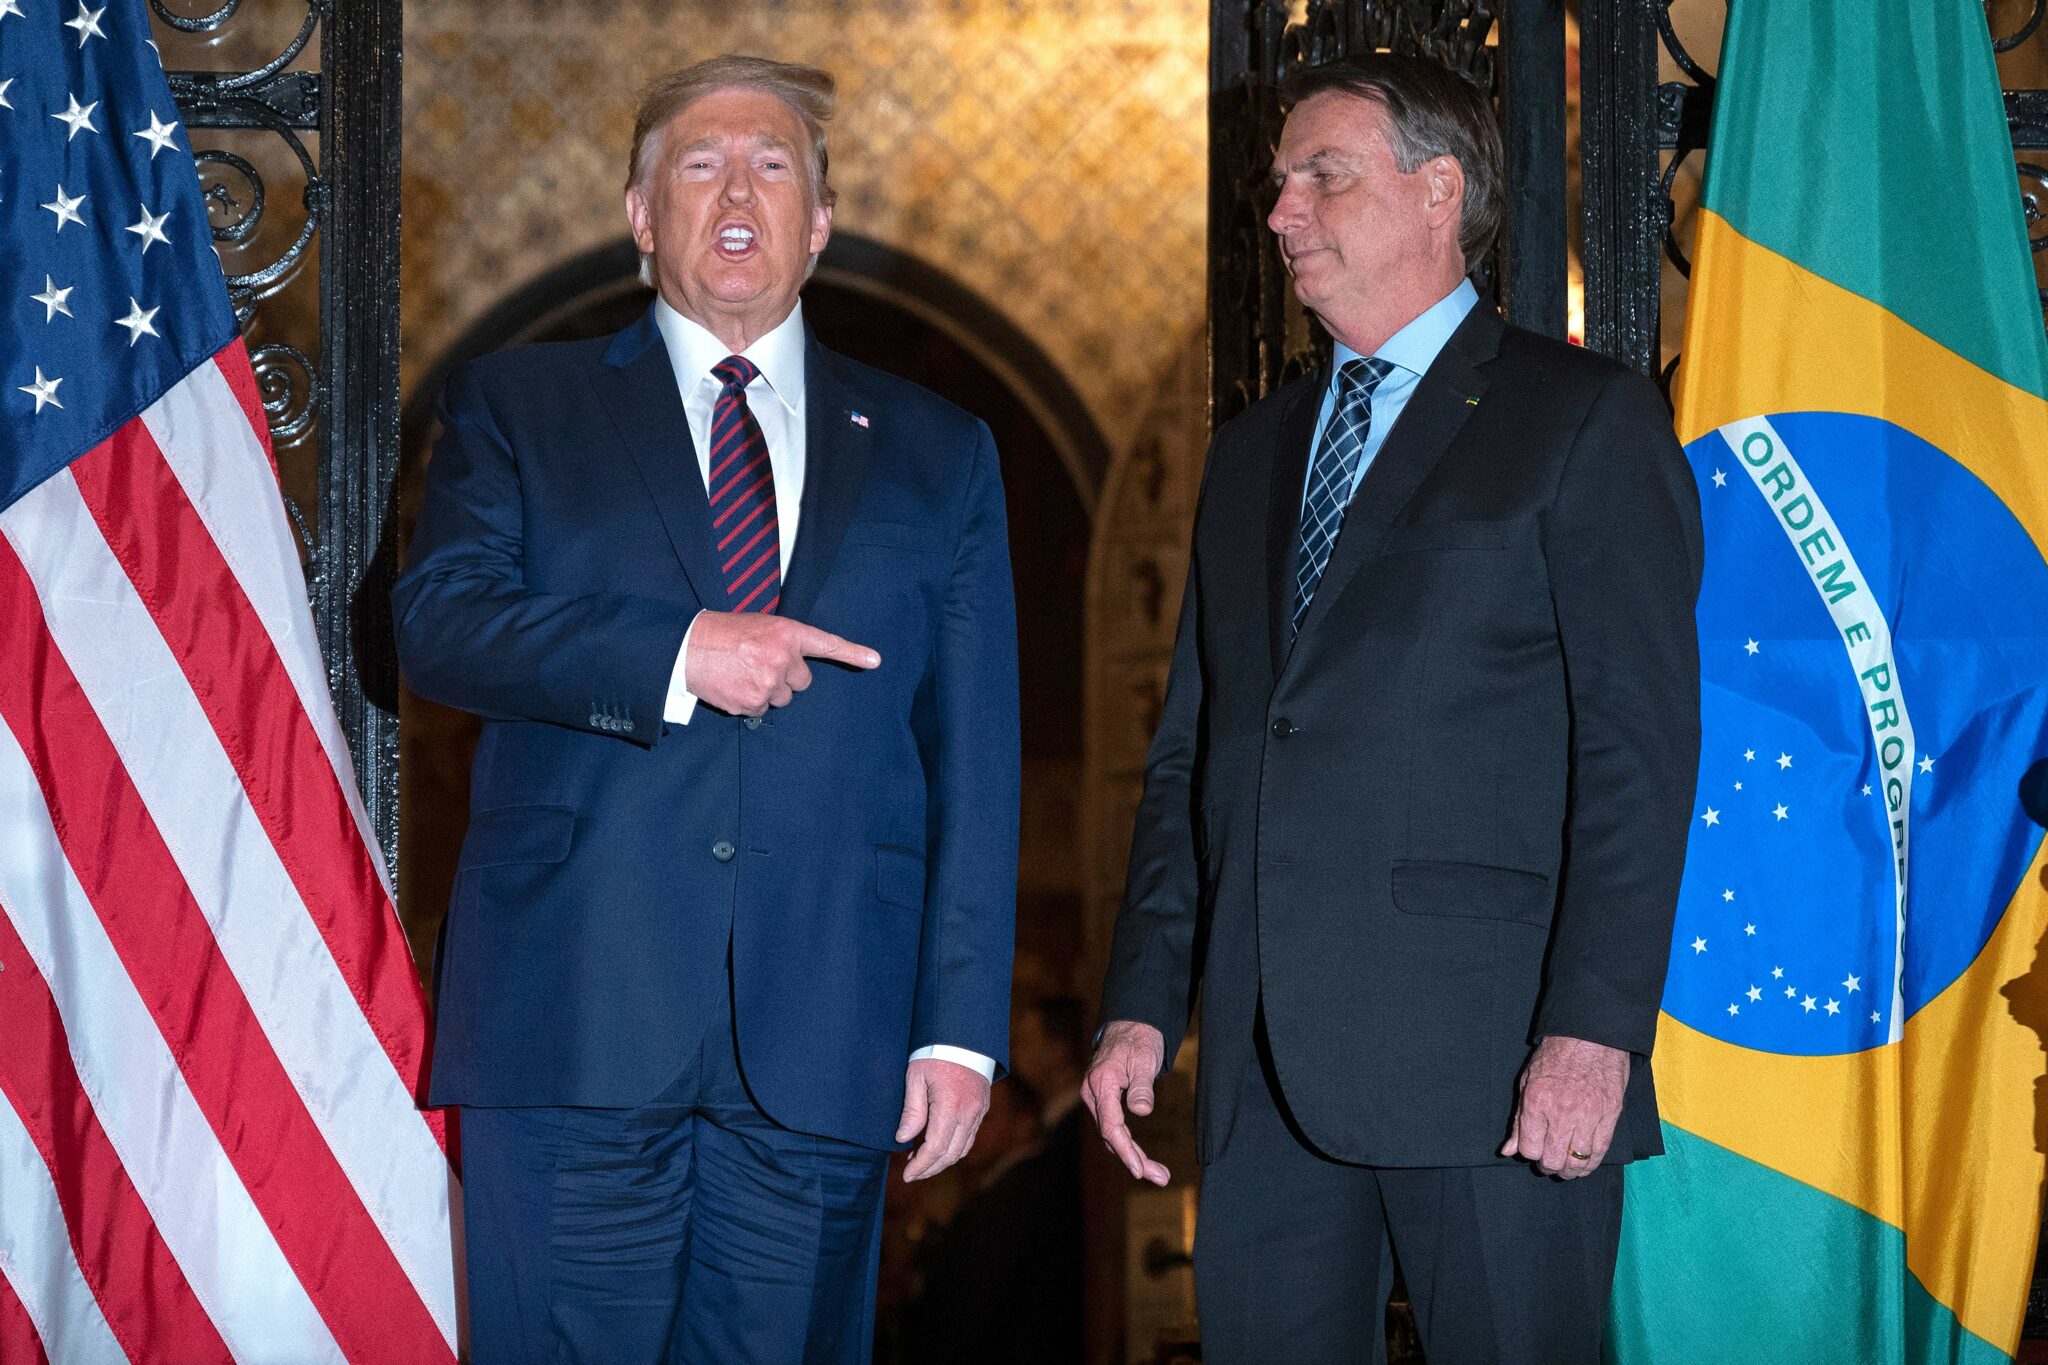 US President Donald Trump (L) speaks with Brazilian President Jair Bolsonaro during a dinner at Mar-a-Lago in Palm Beach, Florida, on March 7, 2020. (Photo by JIM WATSON / AFP) (Photo by JIM WATSON/AFP via Getty Images)